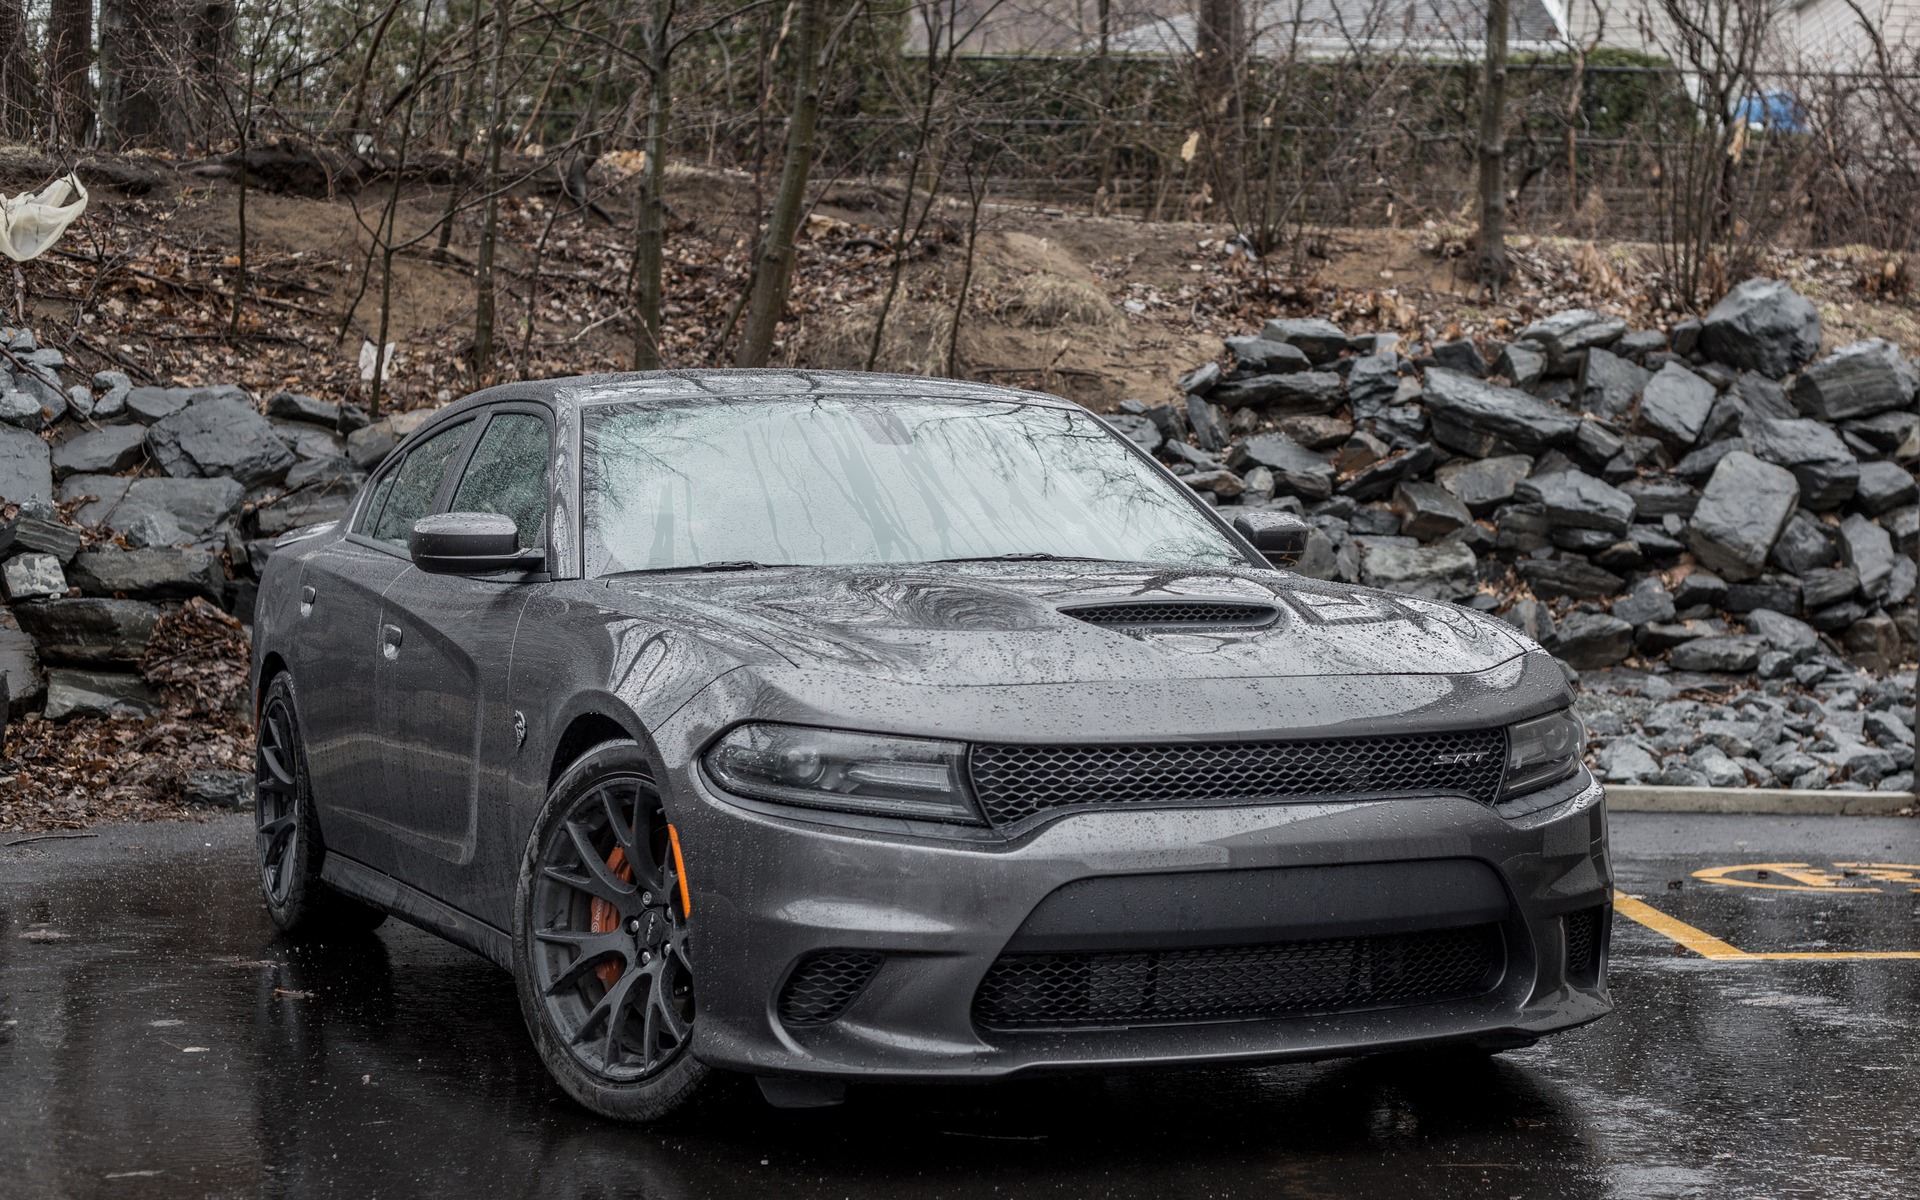 Dodge Charger R T Scat Pack Specs Picture Car Wallpaper